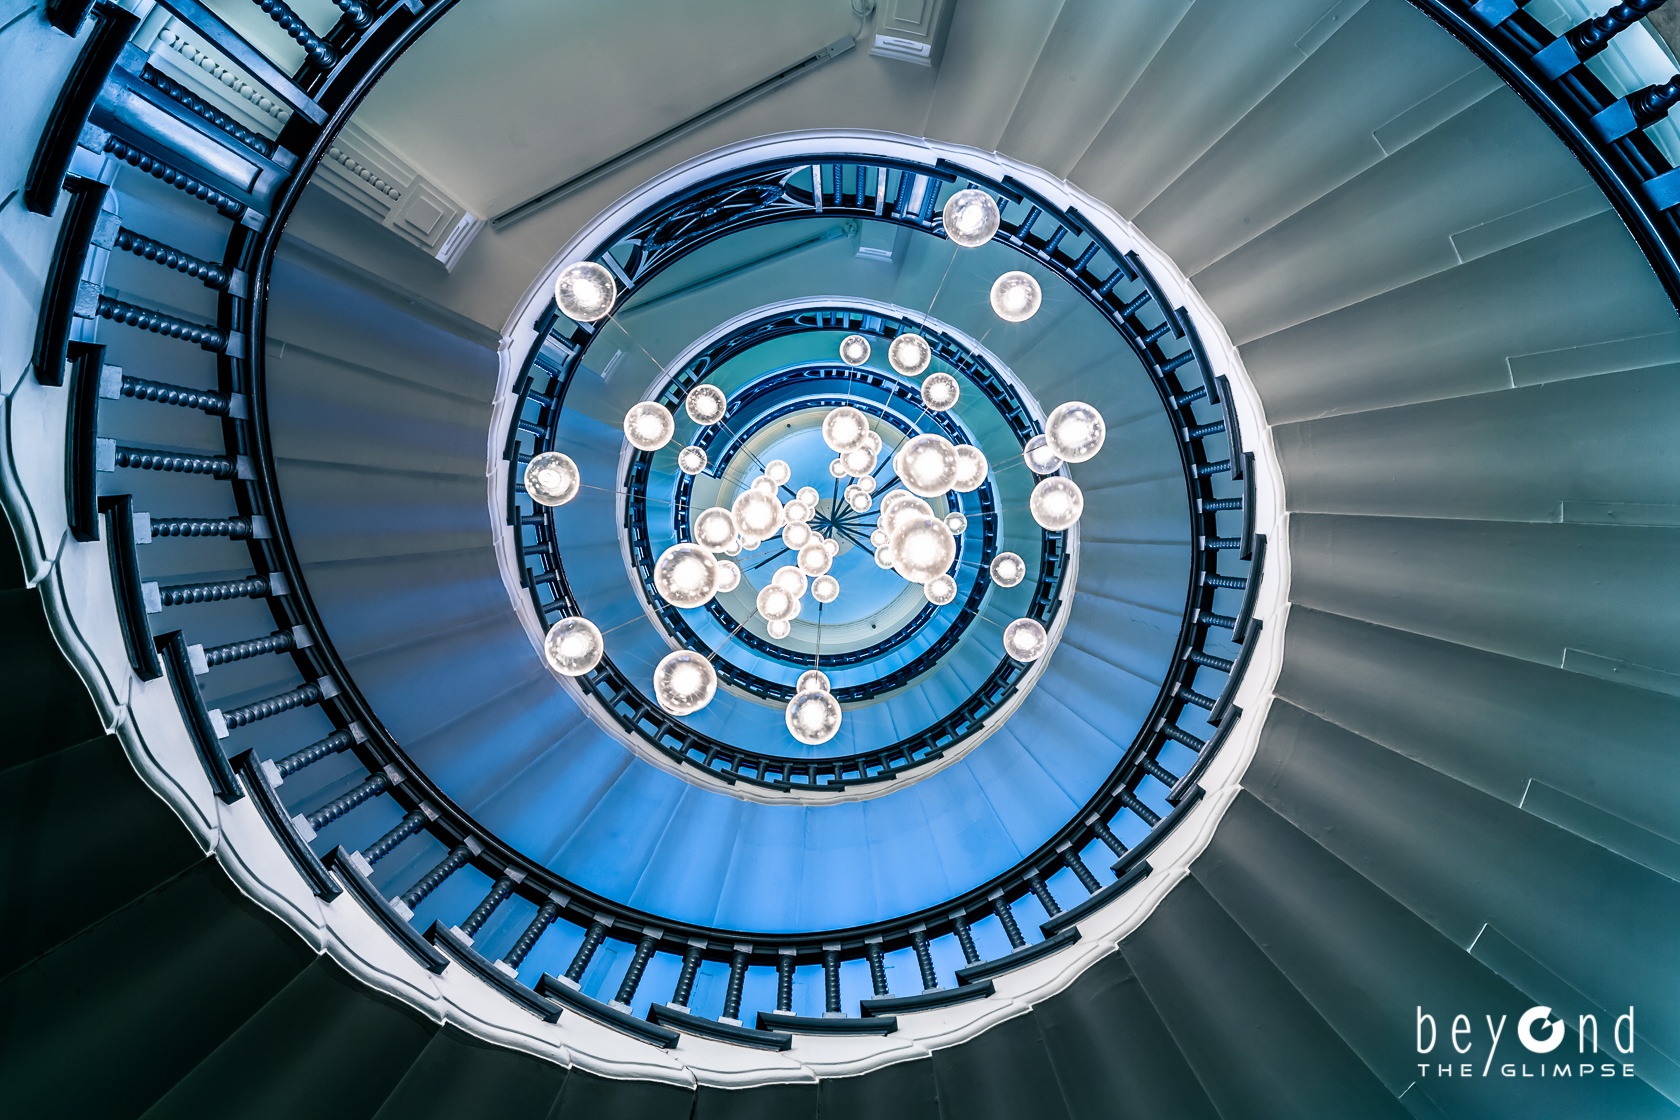 Lose Yourself in This Collection of Entrancing Spiral Staircase Photos